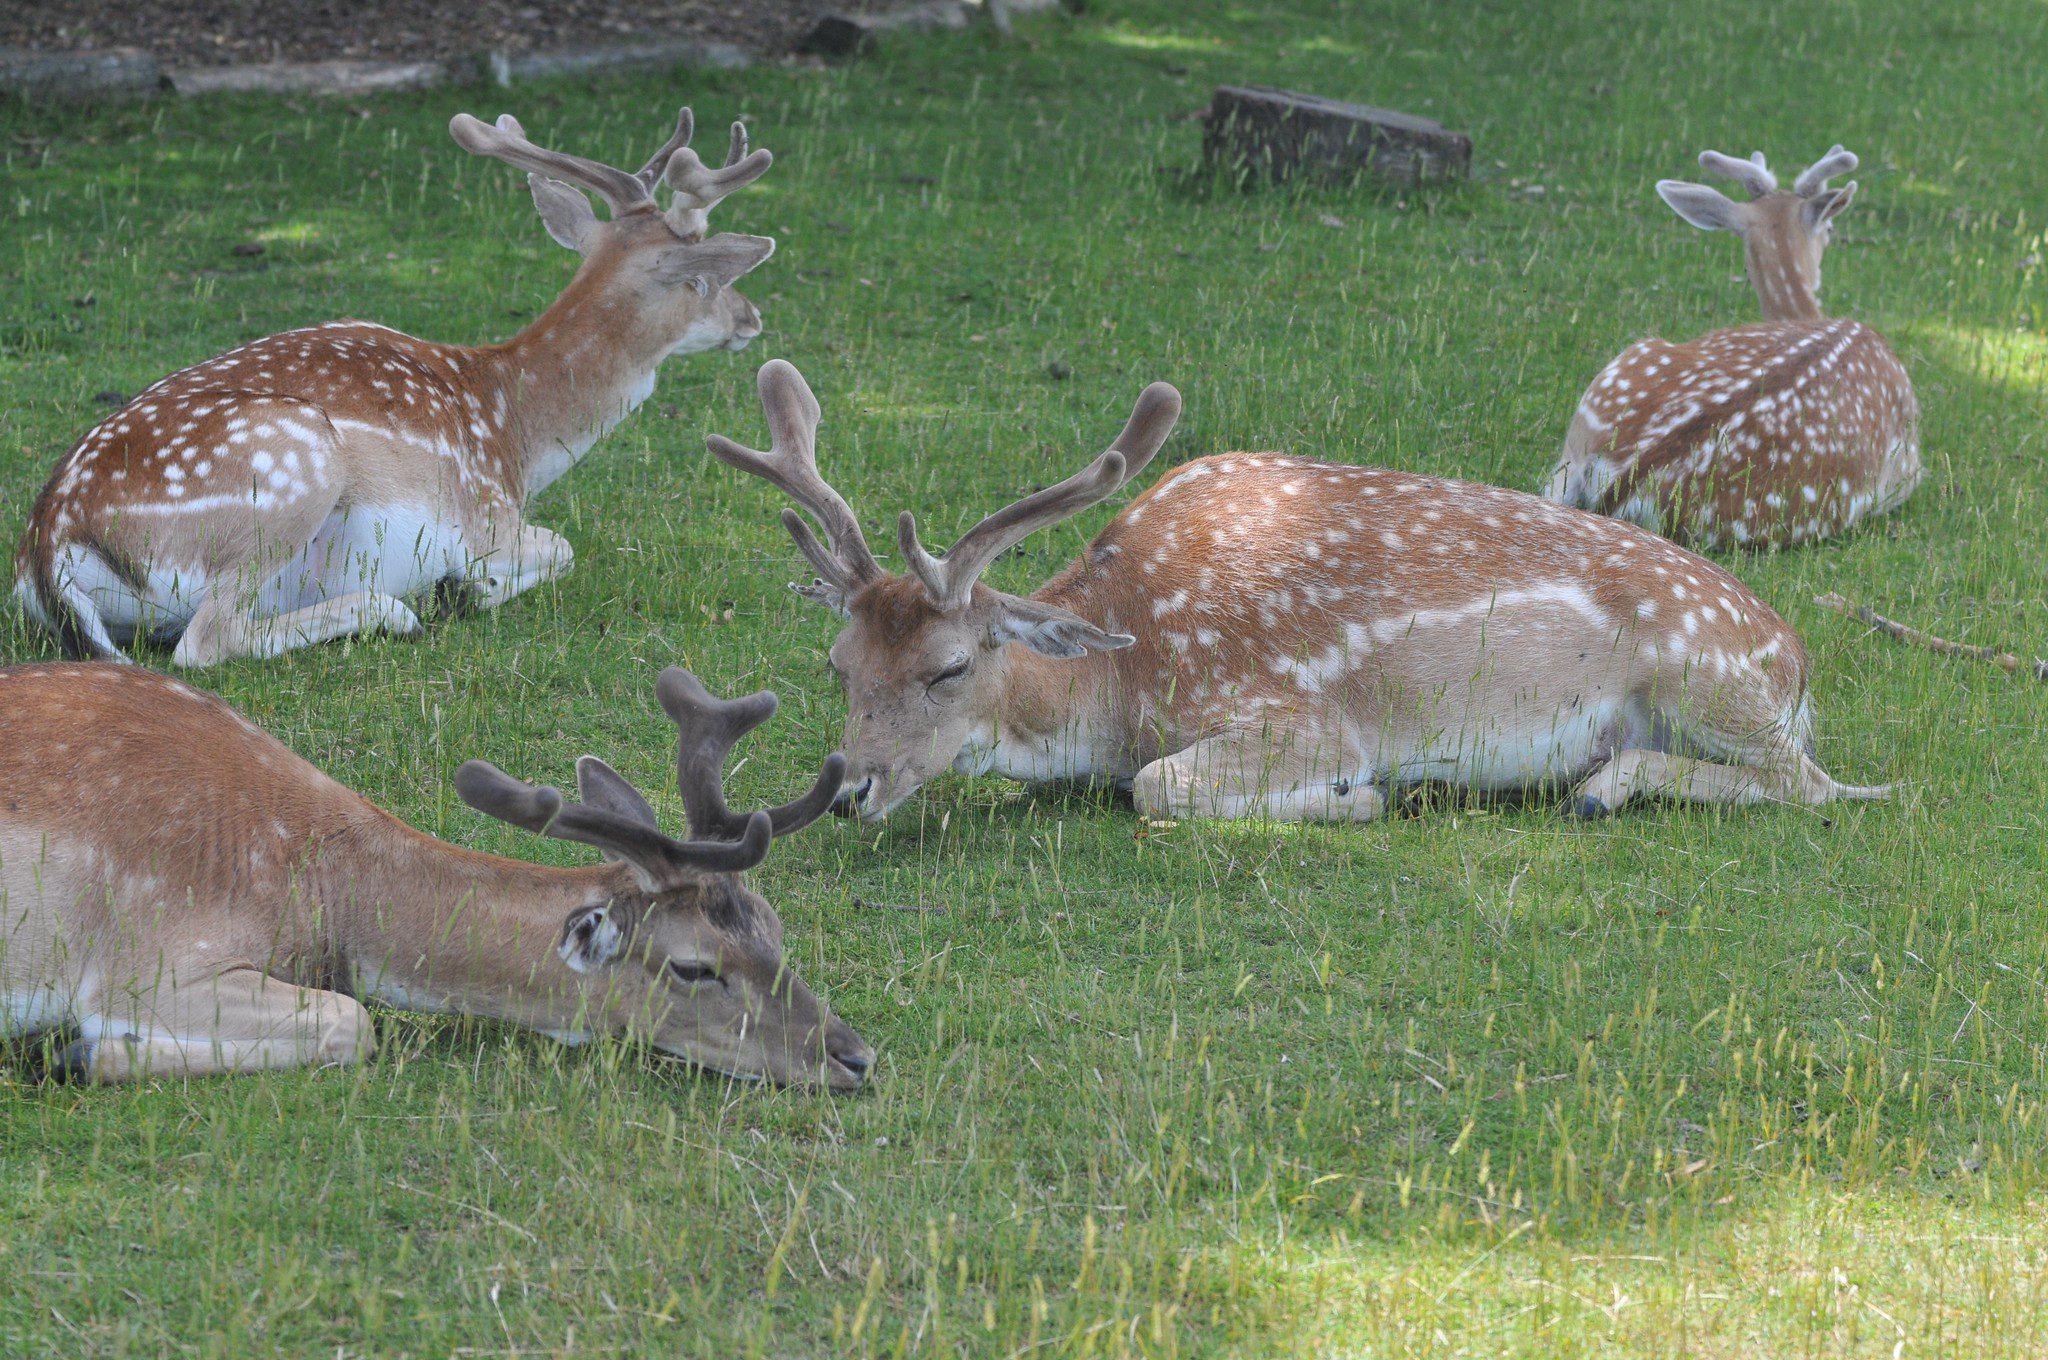 Four deer resting on the grass